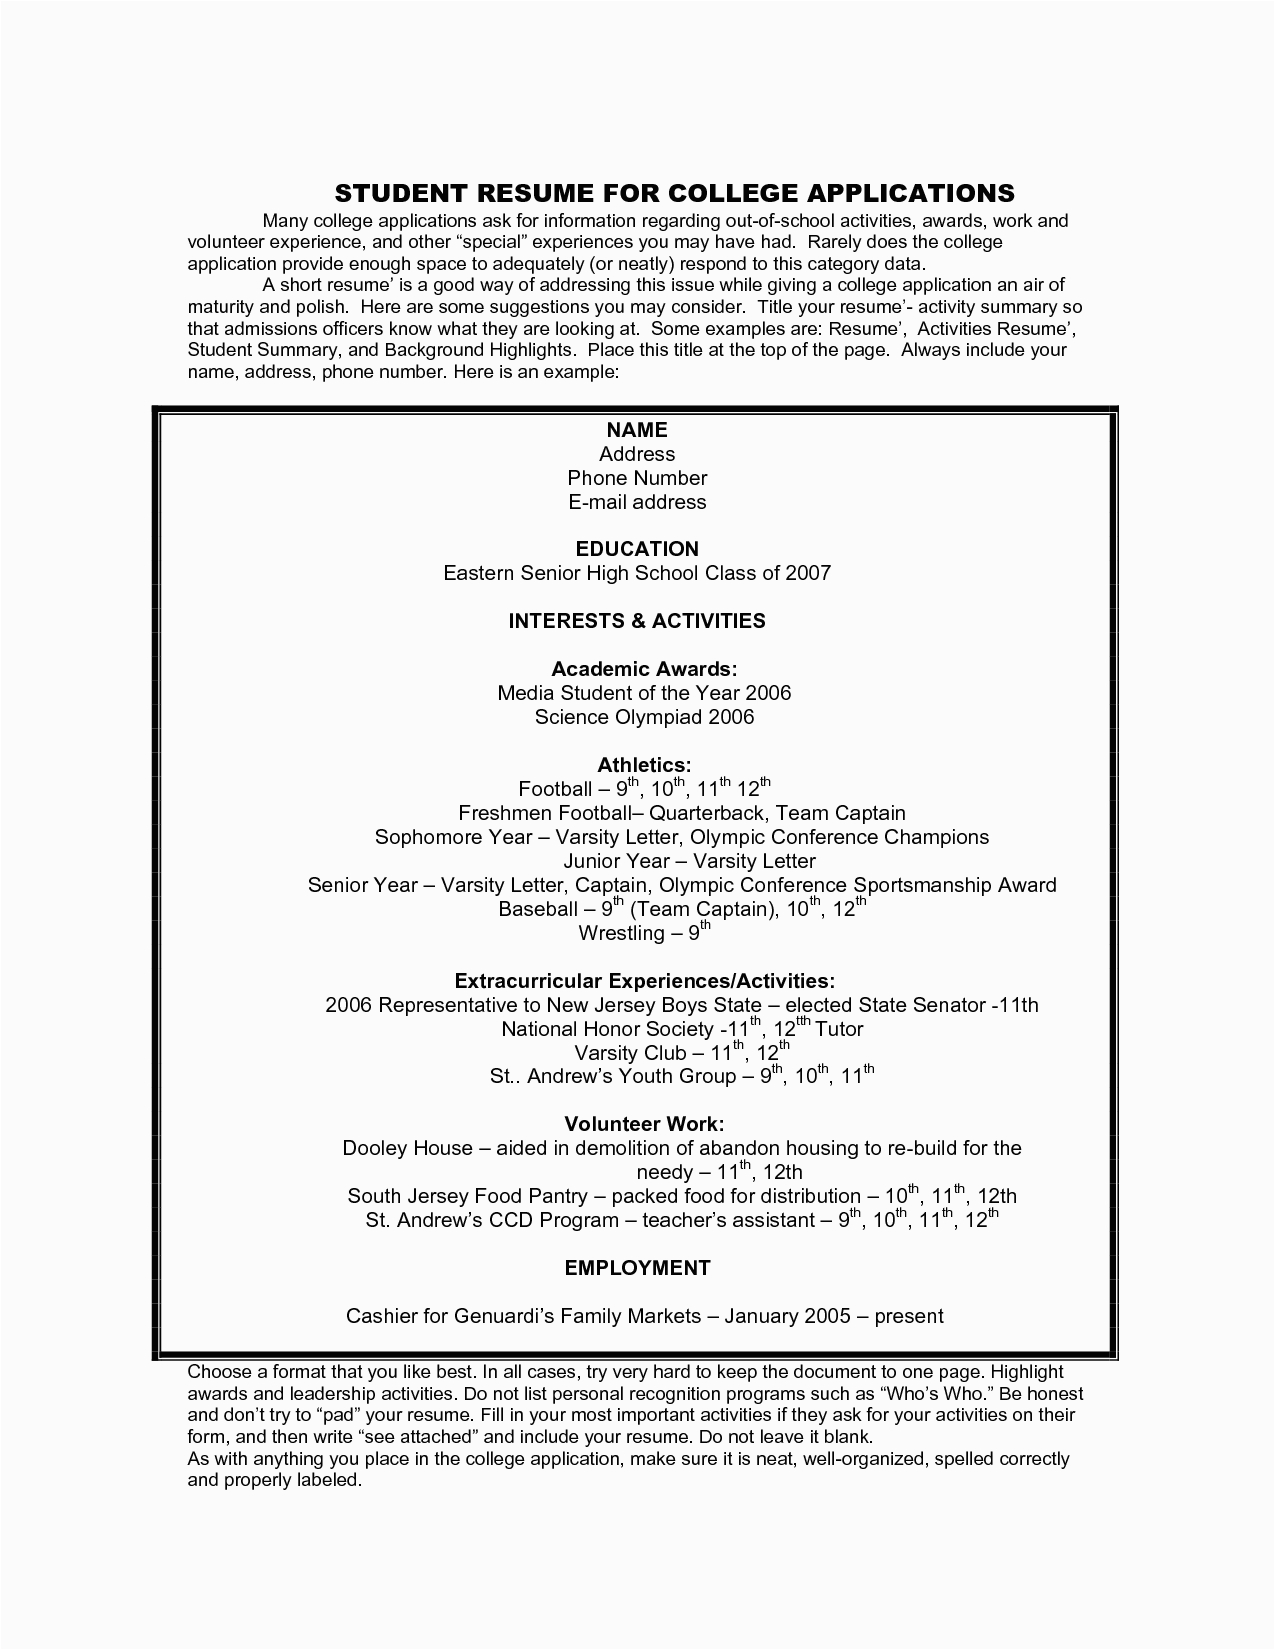 Sample Resume Objective for College Application College Admission Resume